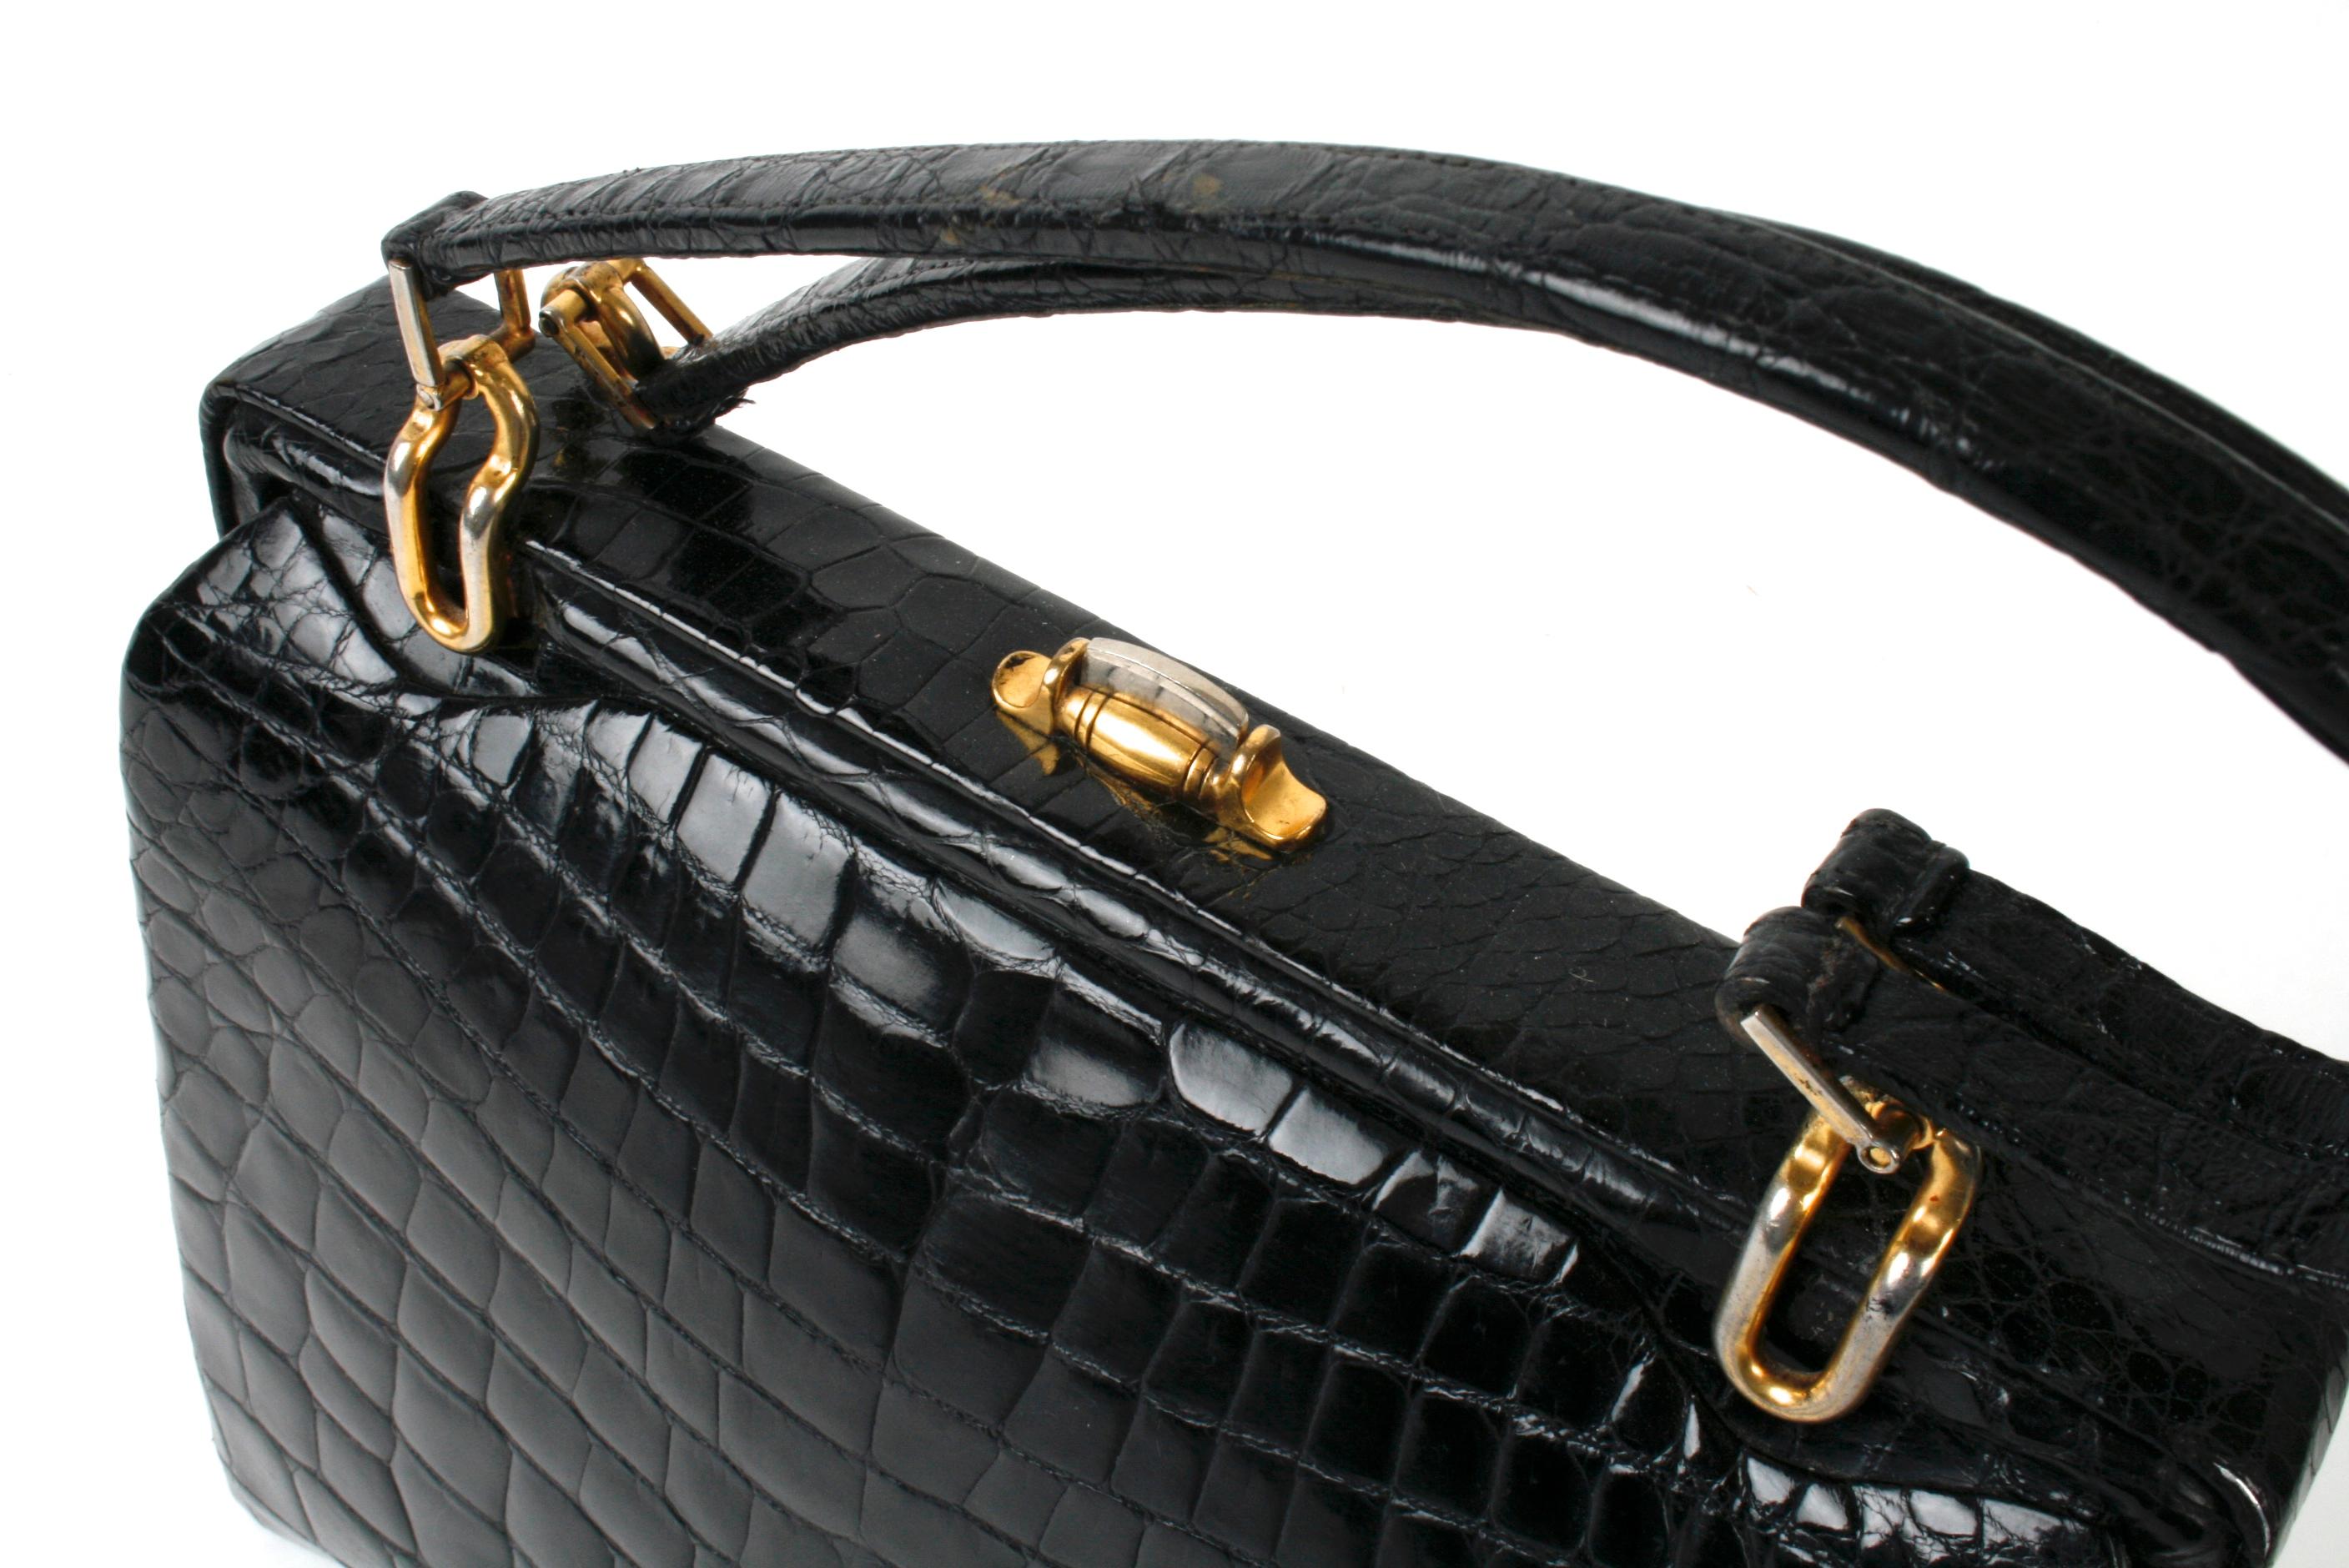 Black alligator handbag with matching double straps and gold-tone link hardware. It has double accordion construction,  a two-tone push-button closure and a wide hinged opening. The purse is lined in a soft tan suede with two alligator lined side